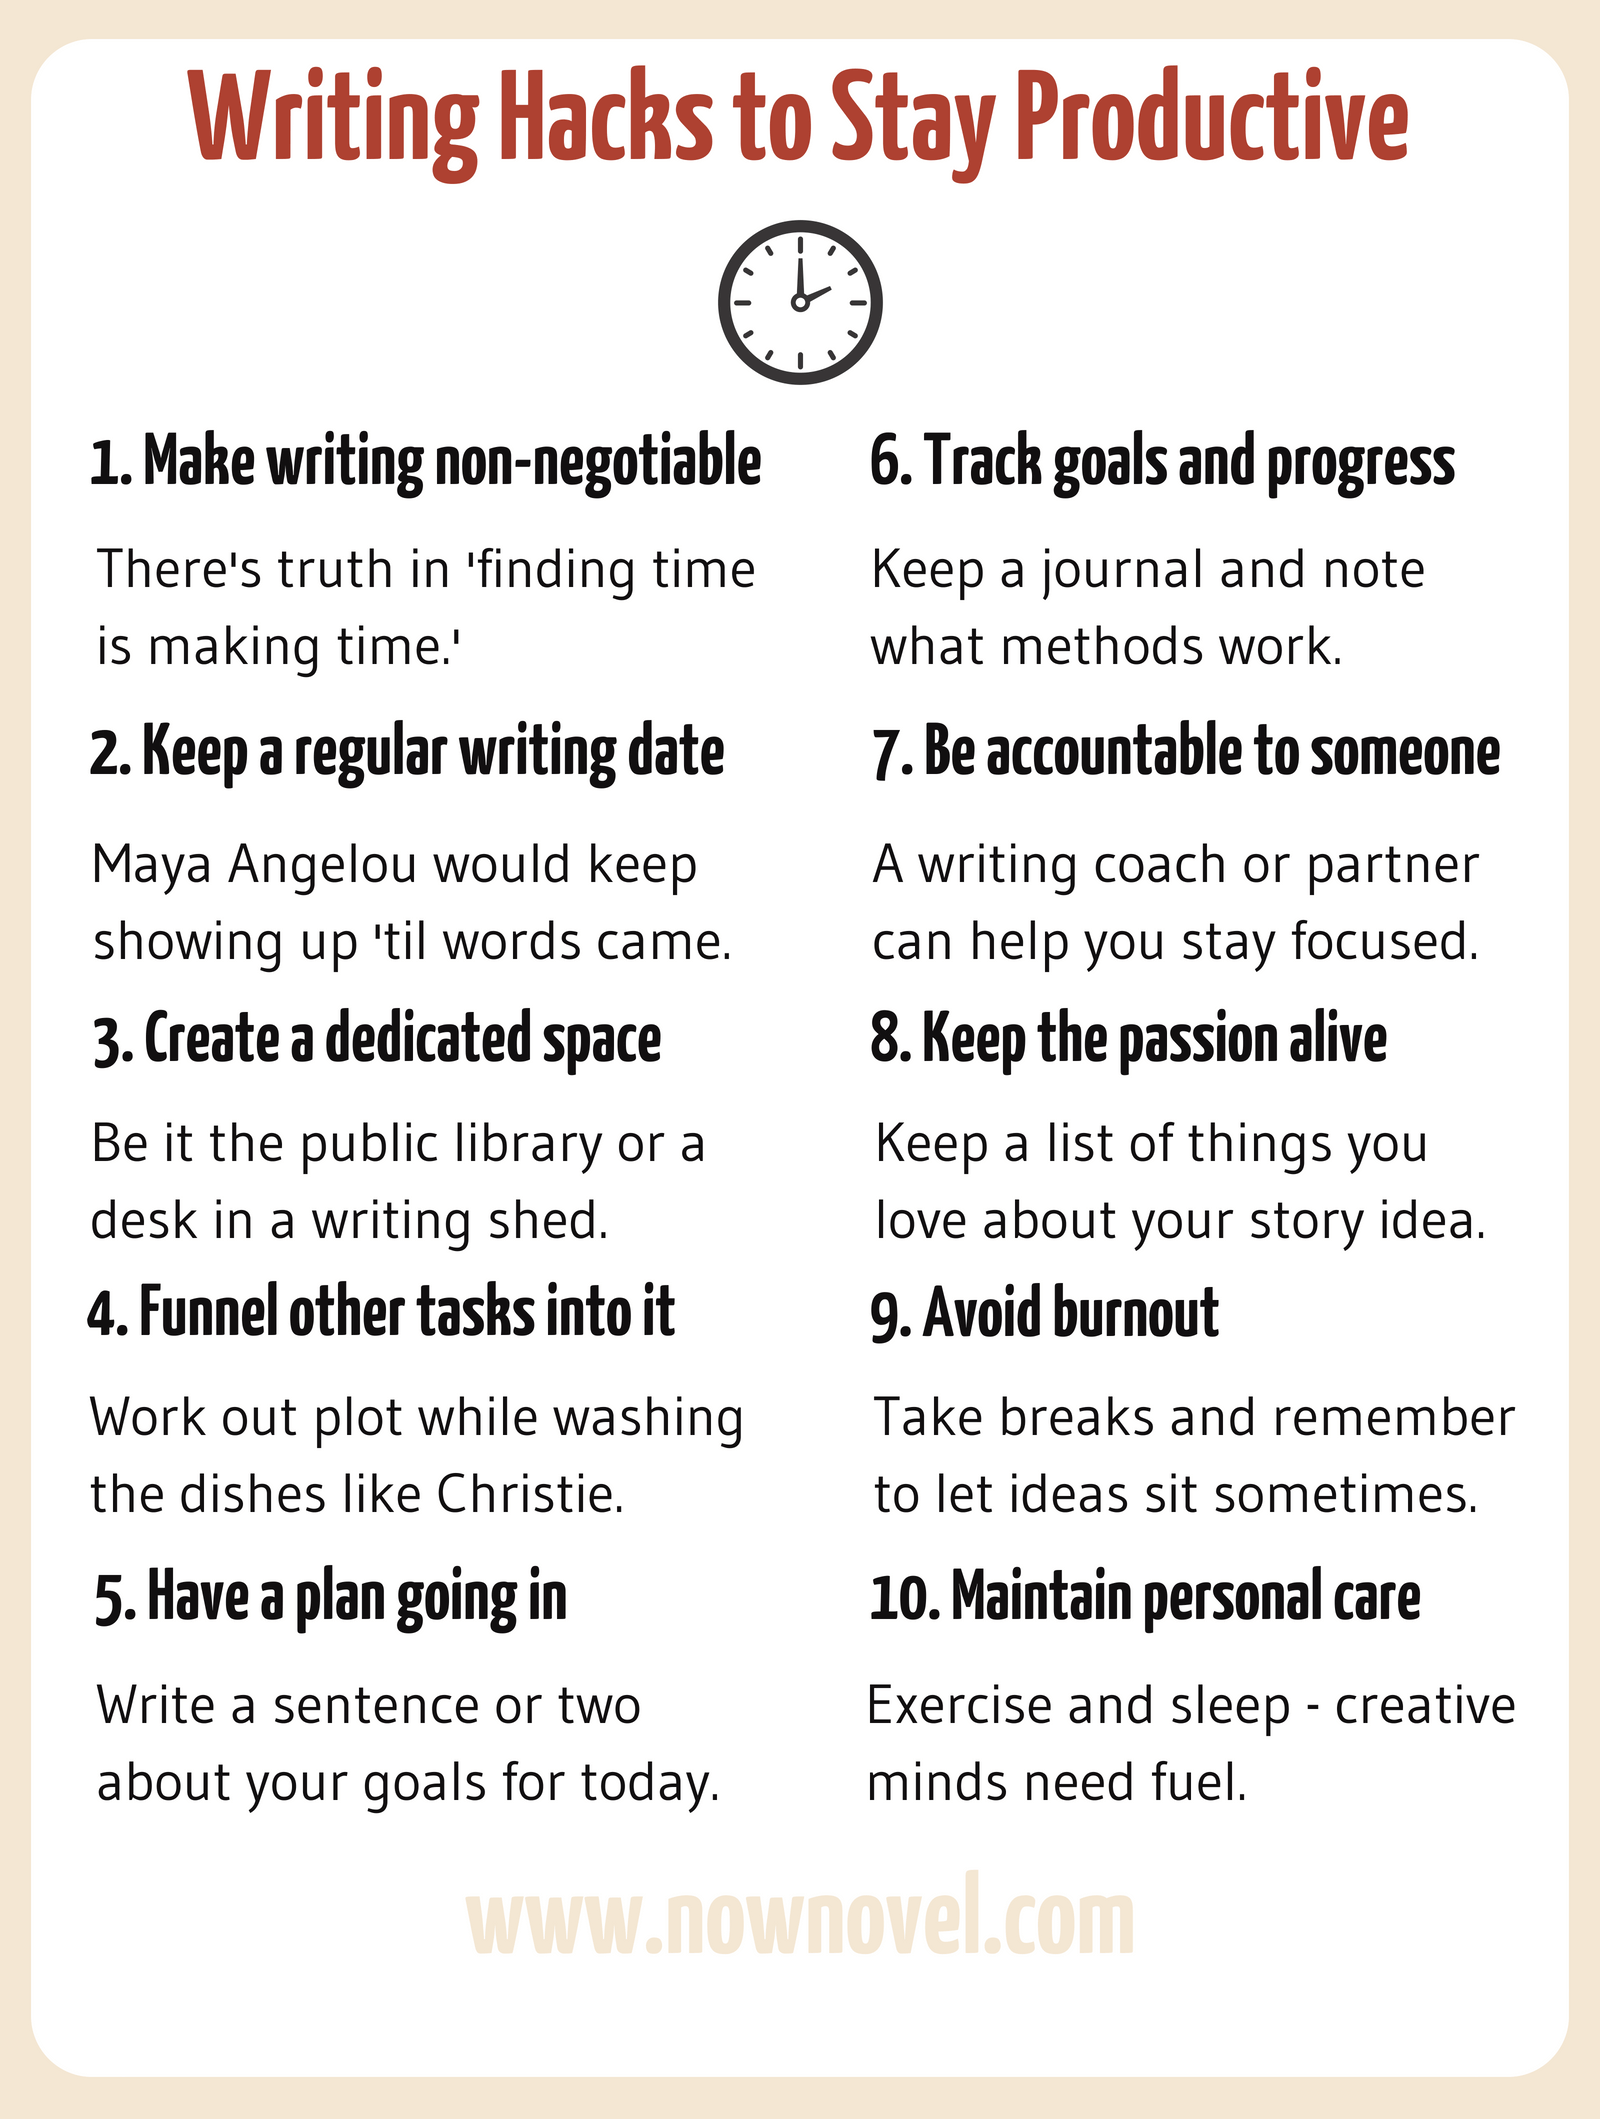 Writing hacks to keep writing and stay productive - infographic | Now Novel